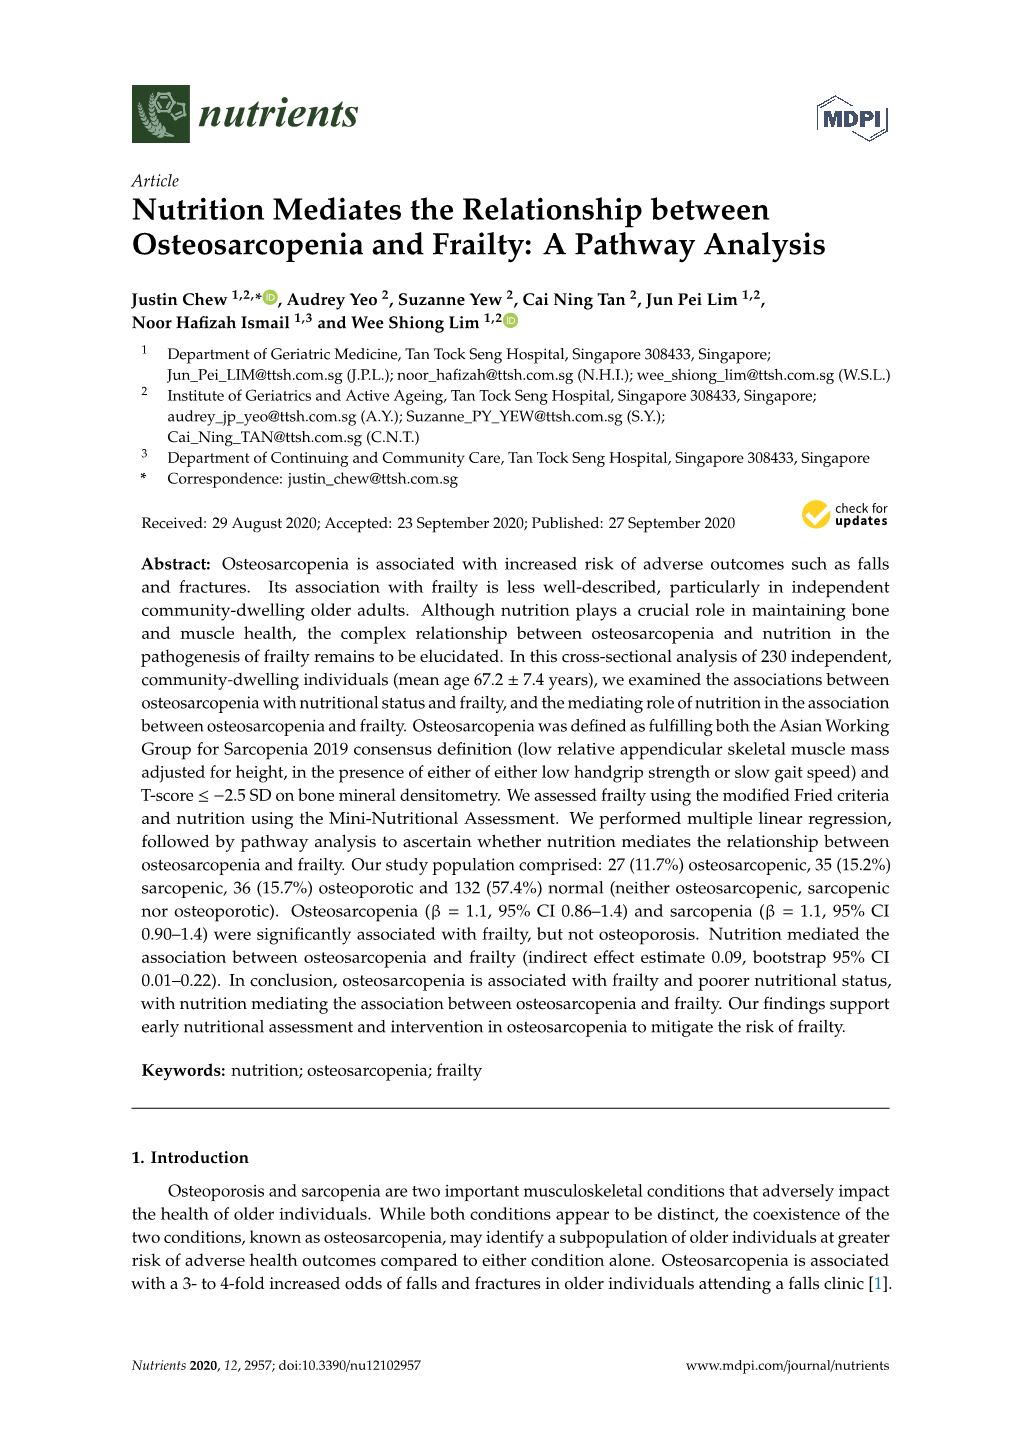 Nutrition Mediates the Relationship Between Osteosarcopenia and Frailty: a Pathway Analysis